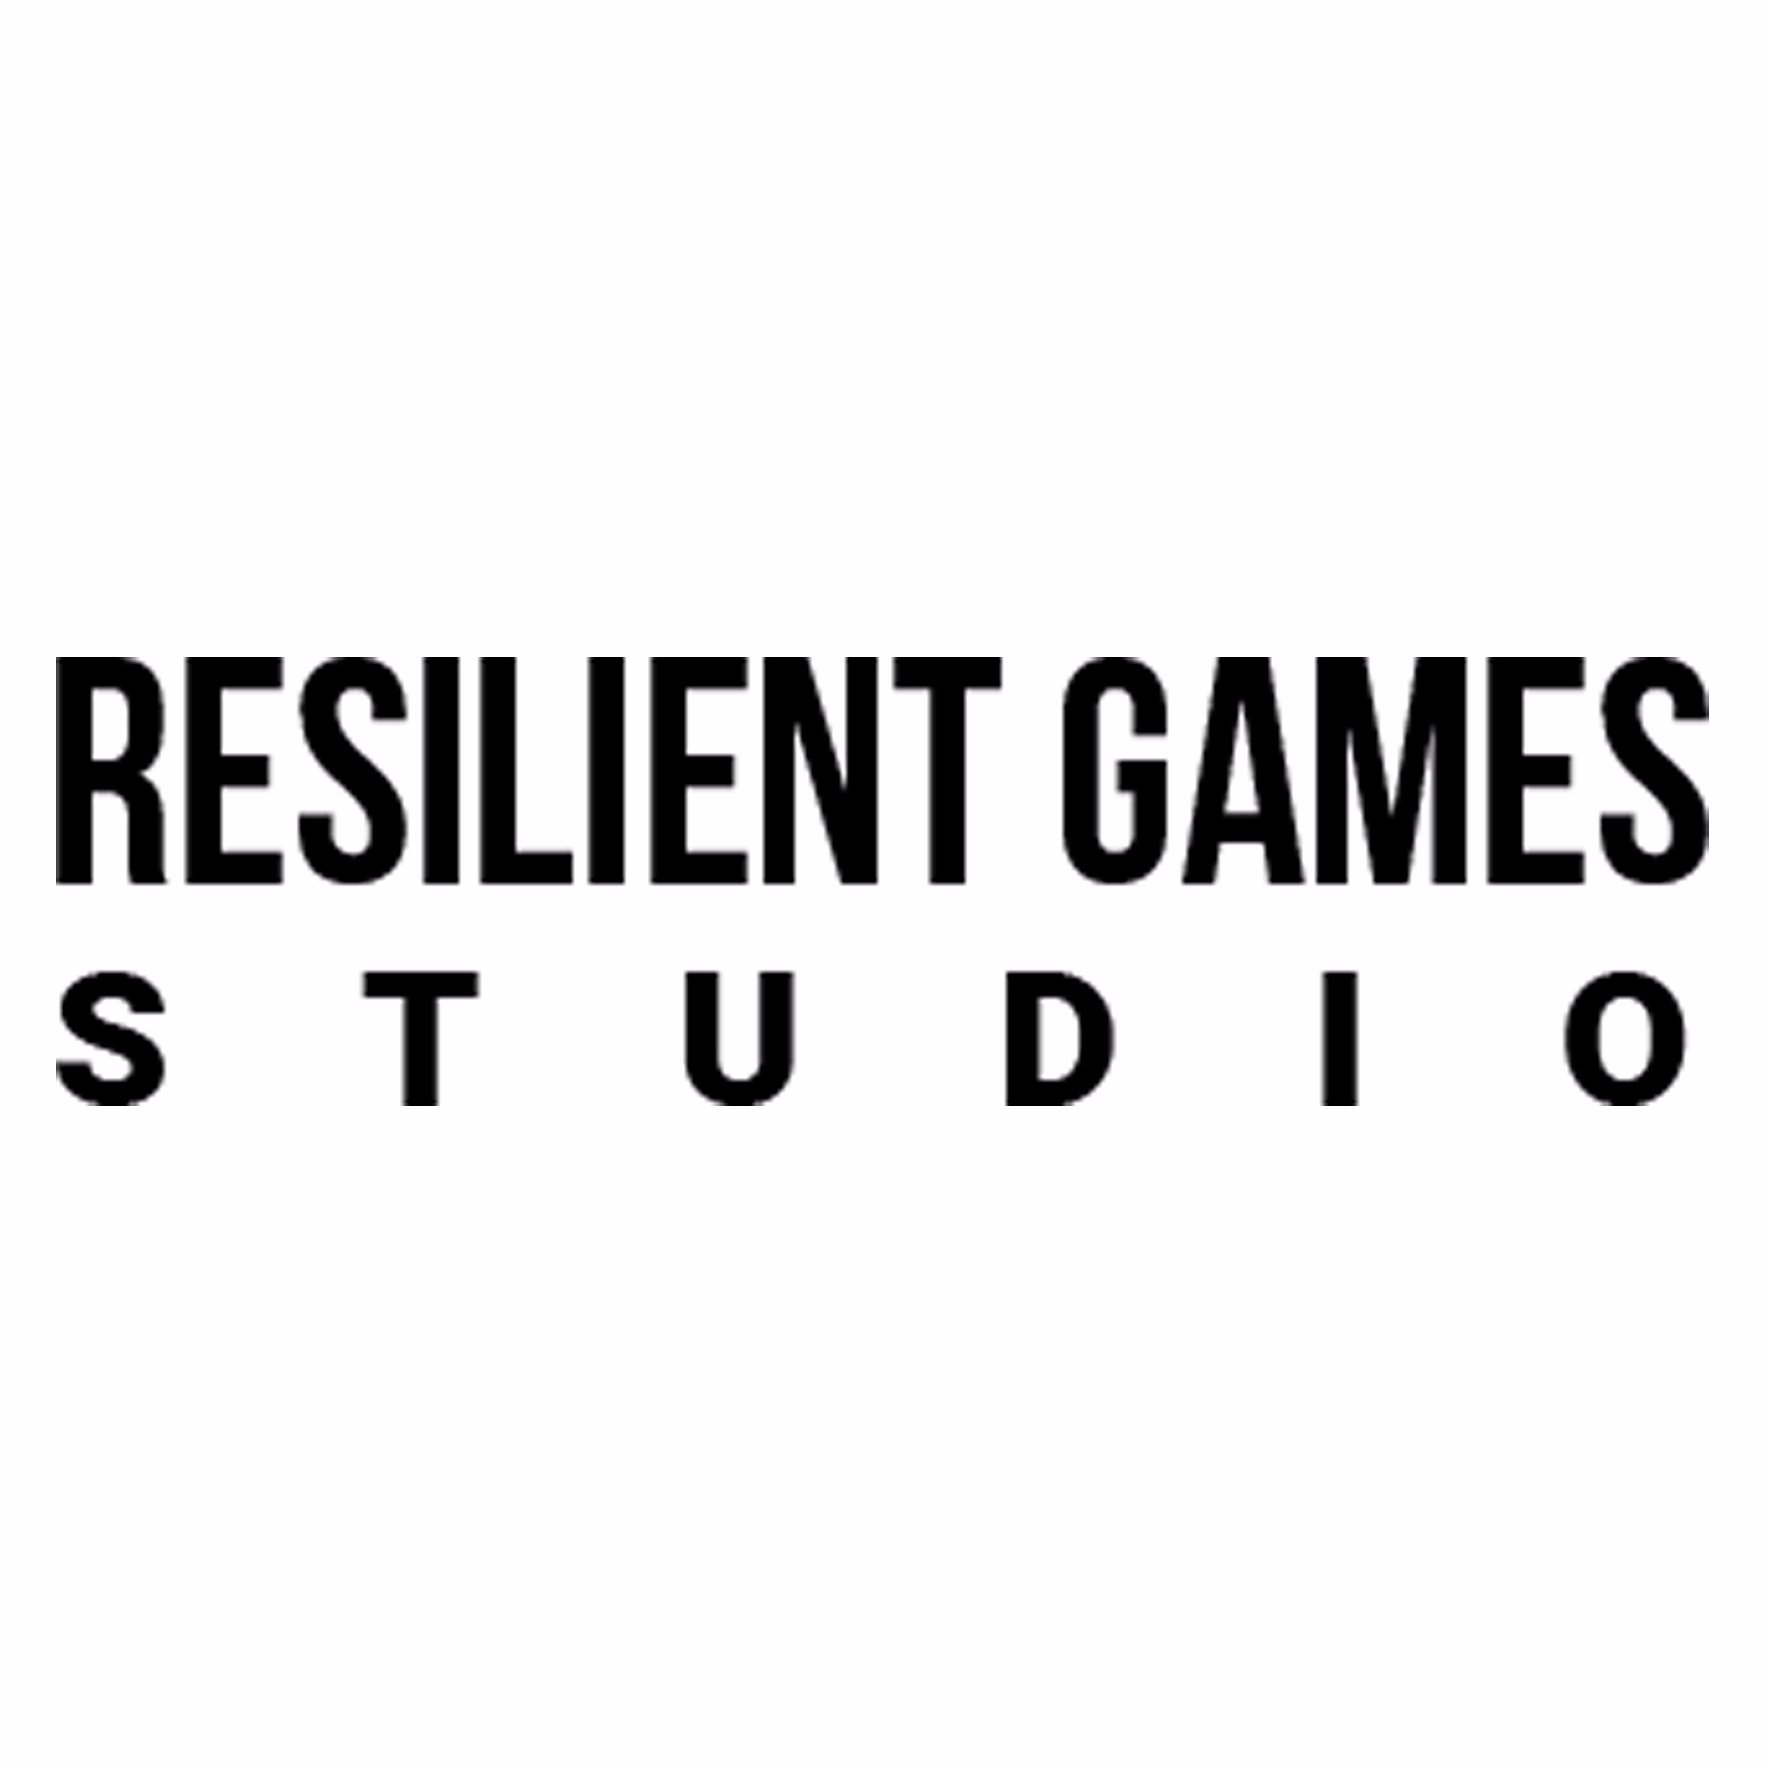 Resilient Games Studio (RGS) is an innovative creator, publisher, and distributor of educational games and tools.